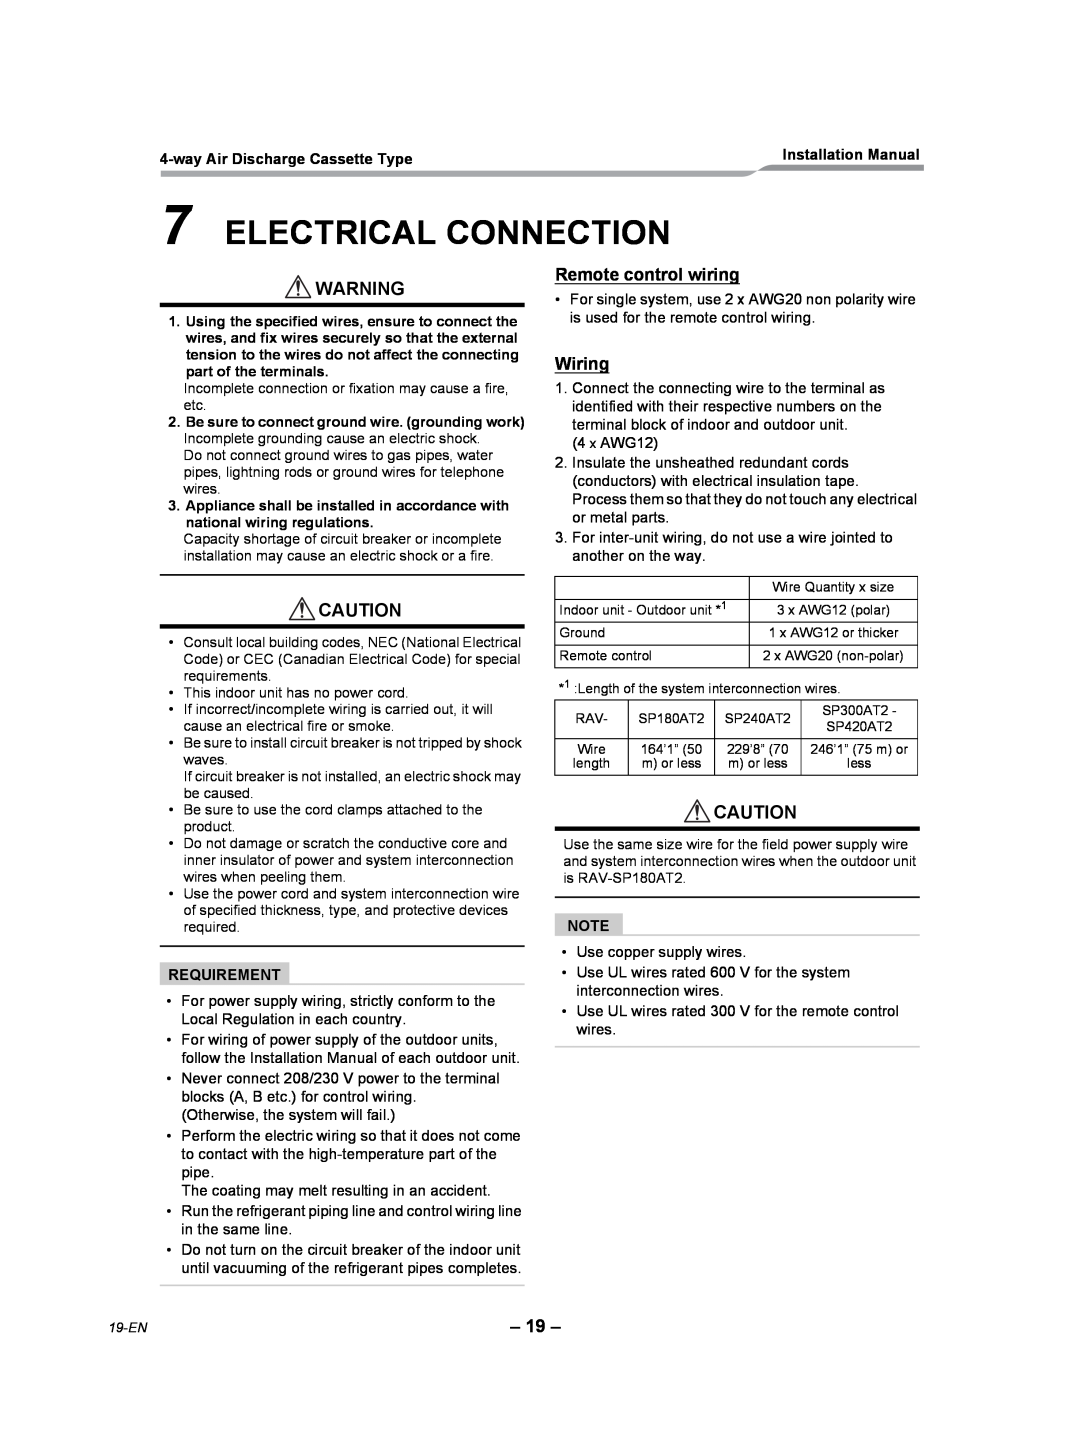 Toshiba RAV-SP180UT-UL Electrical Connection, Remote control wiring, Wiring, wayAir Discharge Cassette Type, Requirement 